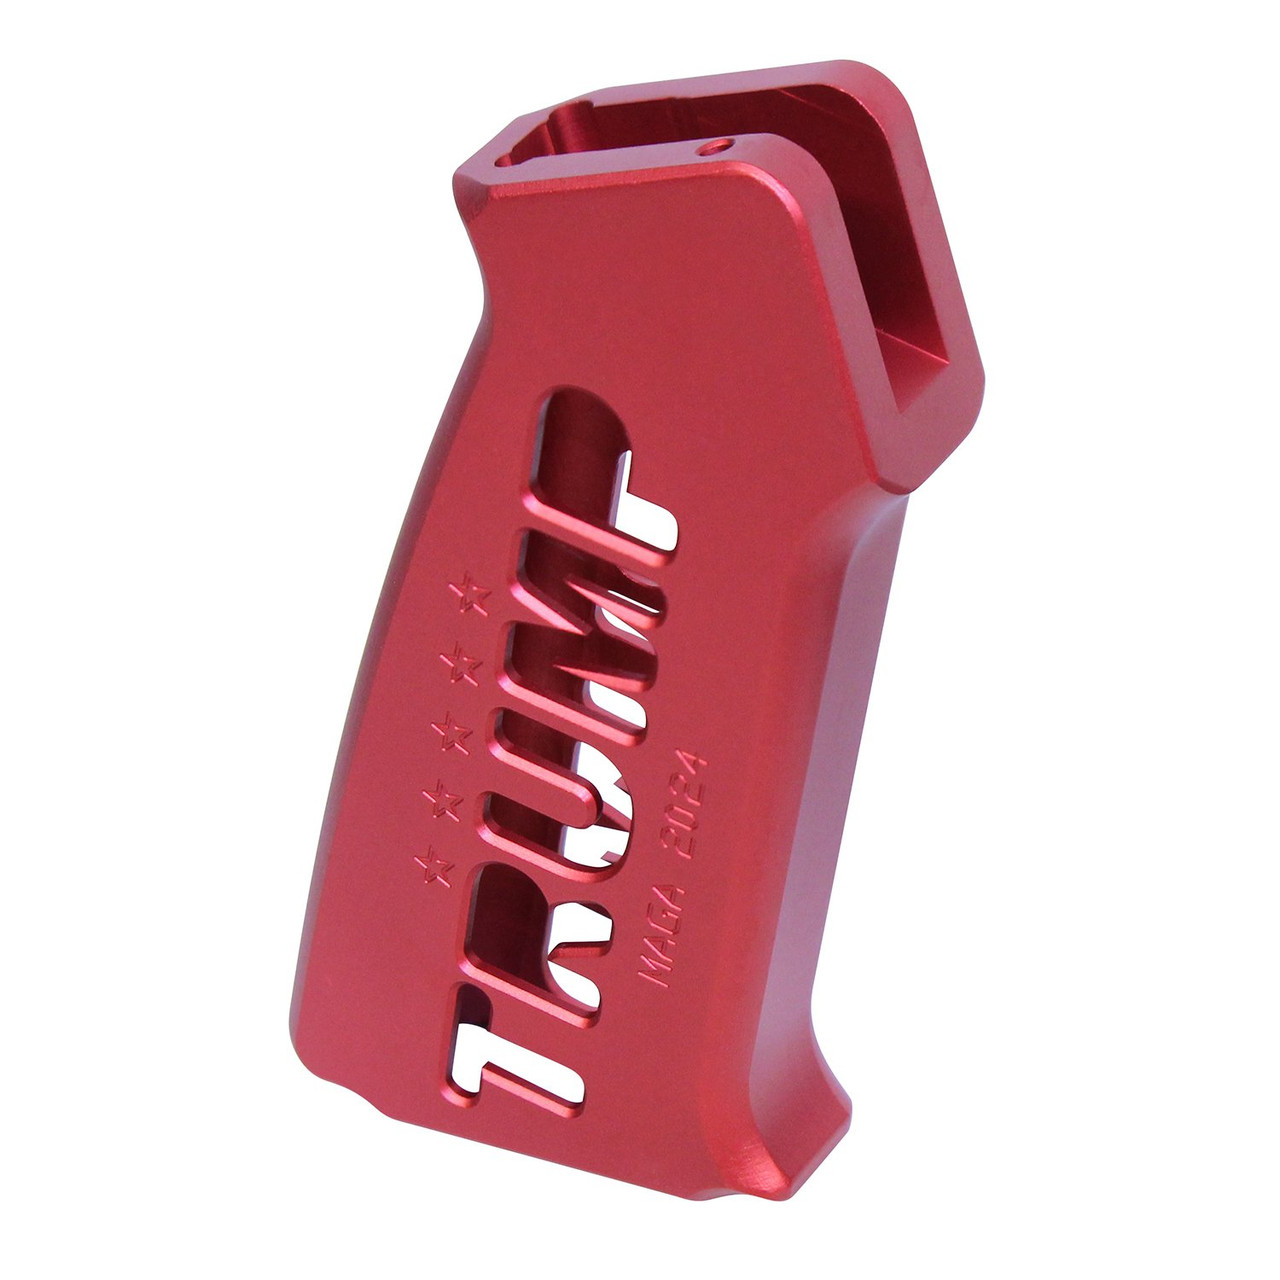 Guntec USA TRUMP-PG-G2-RED AR-15 "Trump Series" Limited Edition Pistol Grip (Anodized Red)